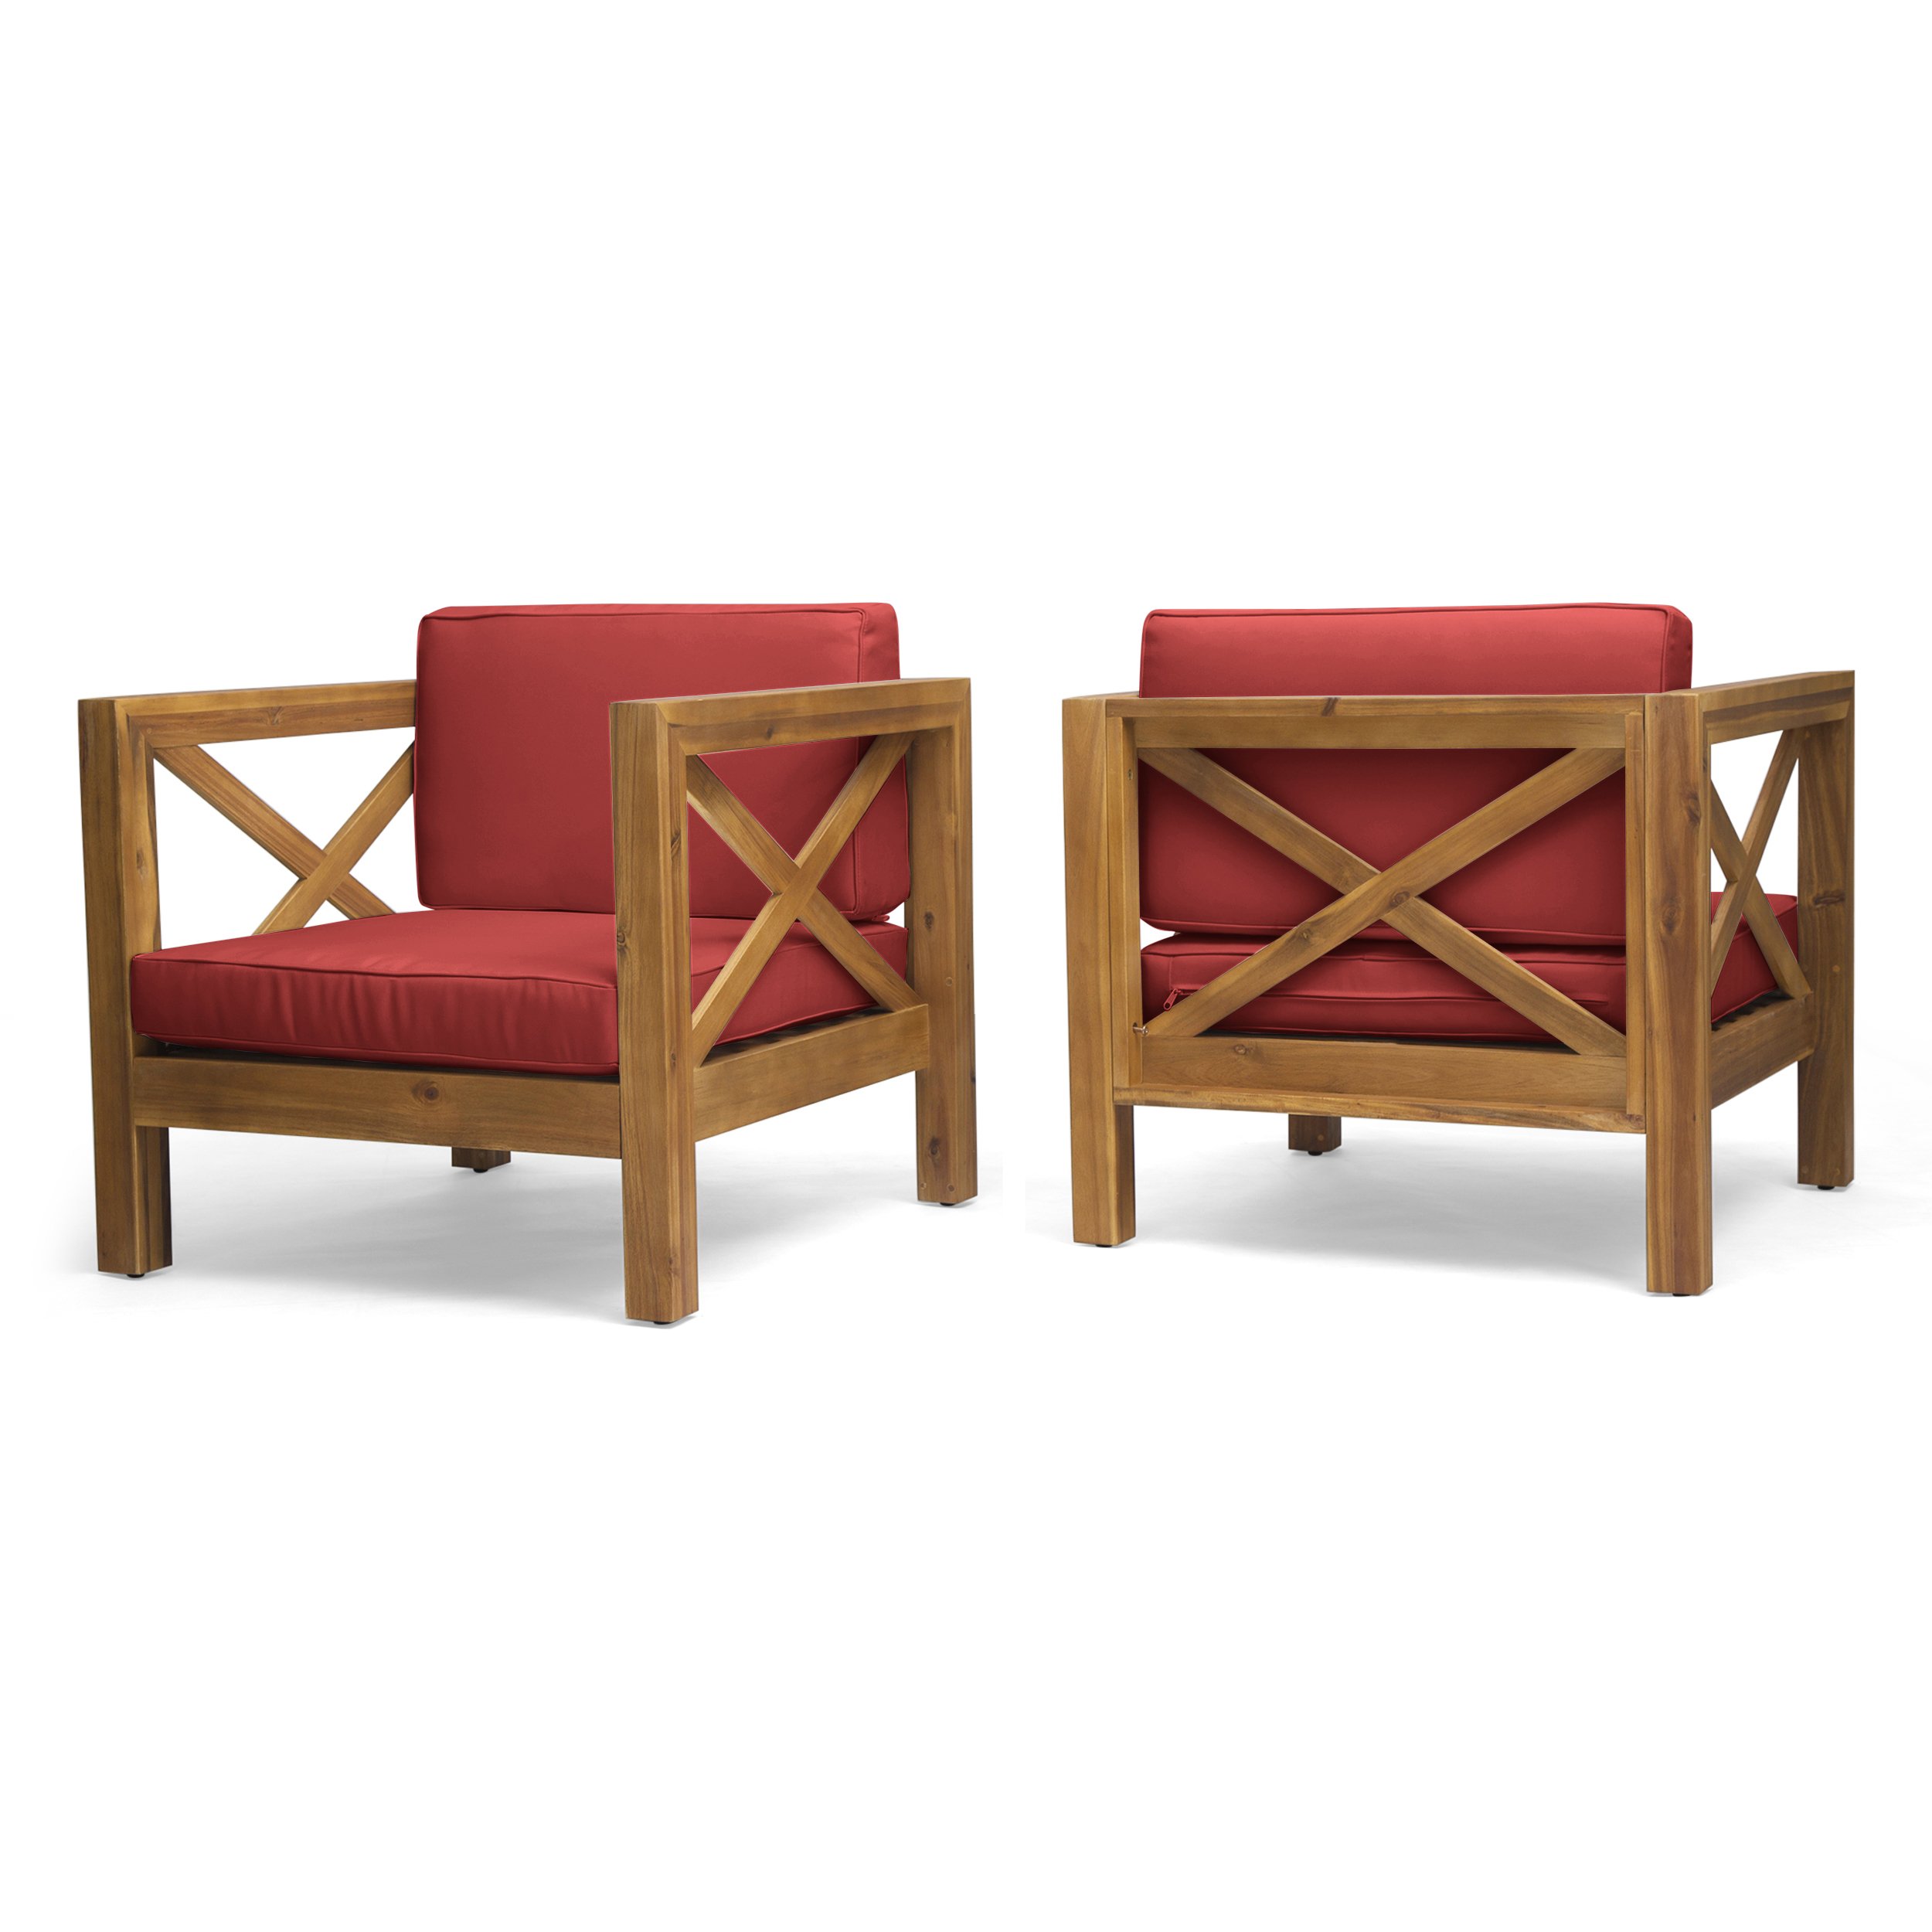 Indira Outdoor Acacia Wood Club Chairs with Cushions (Set of 2) - teak + red